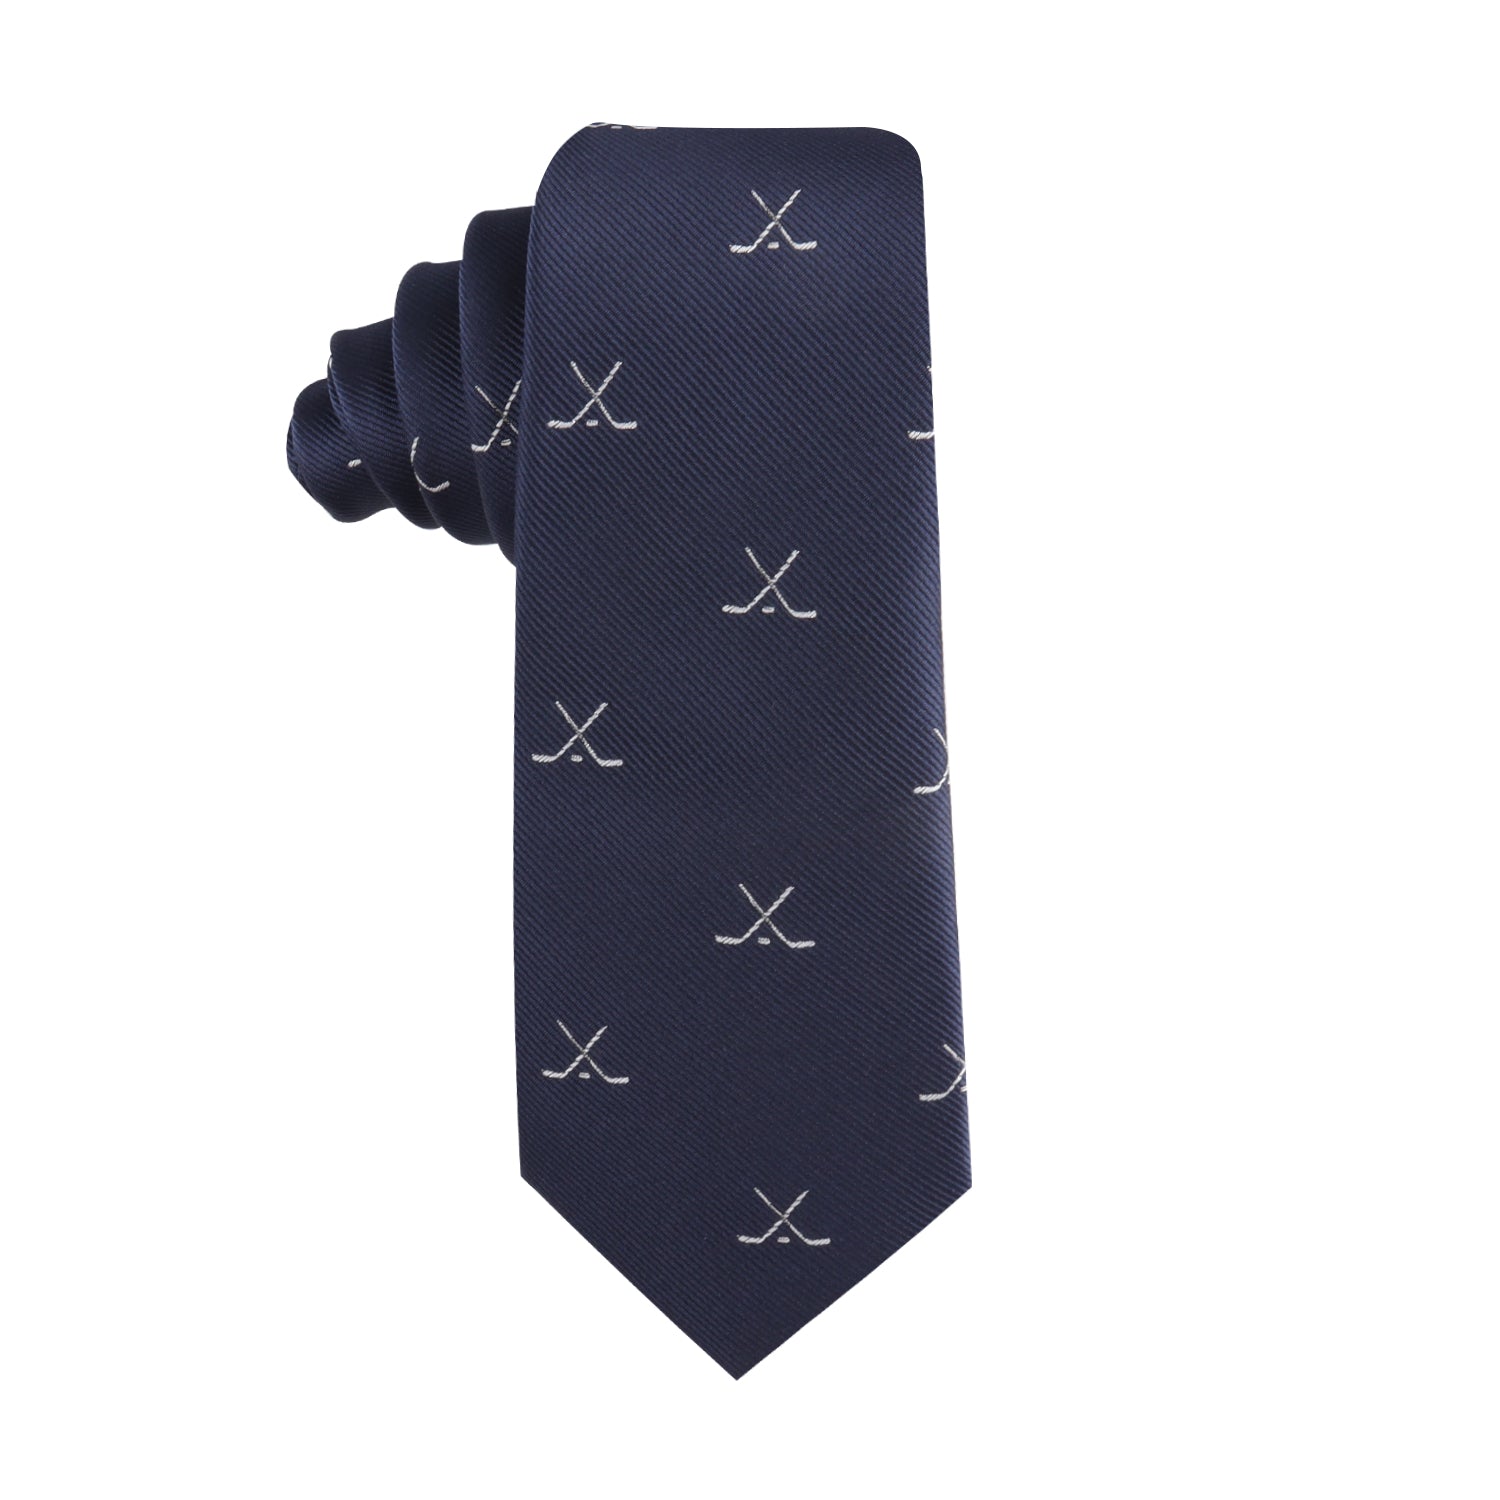 This stylish Crossed Ice Hockey Skinny Tie combines the coolness of ice with the excitement of hockey sticks. It's a guaranteed score for anyone looking to earn major style points.